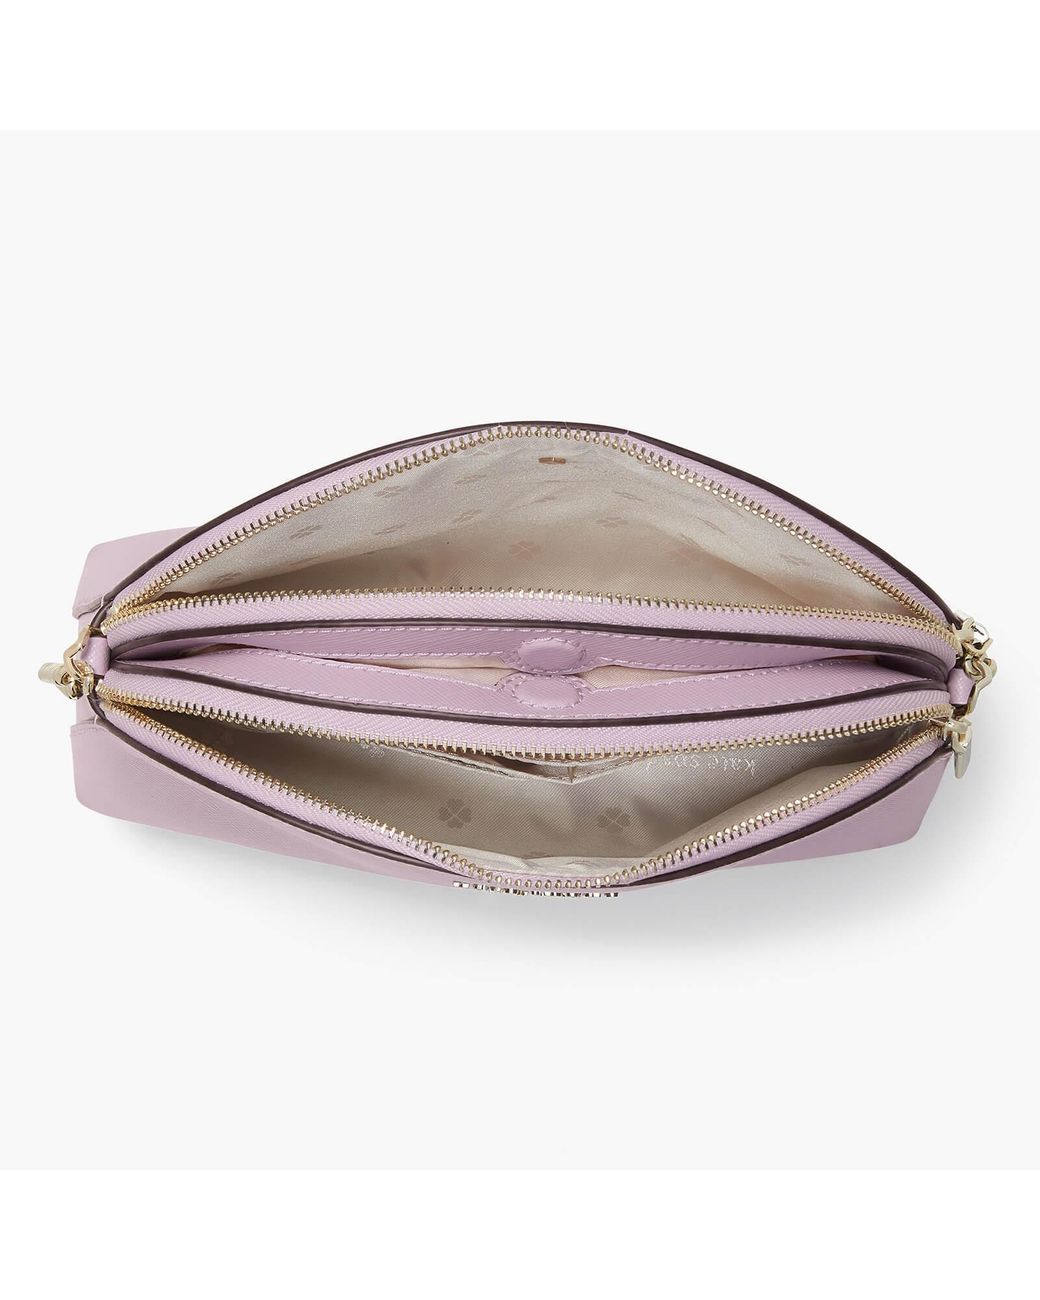 Kate Spade Spencer Double Zip Dome Crossbody Serene Pink Saffiano Leather